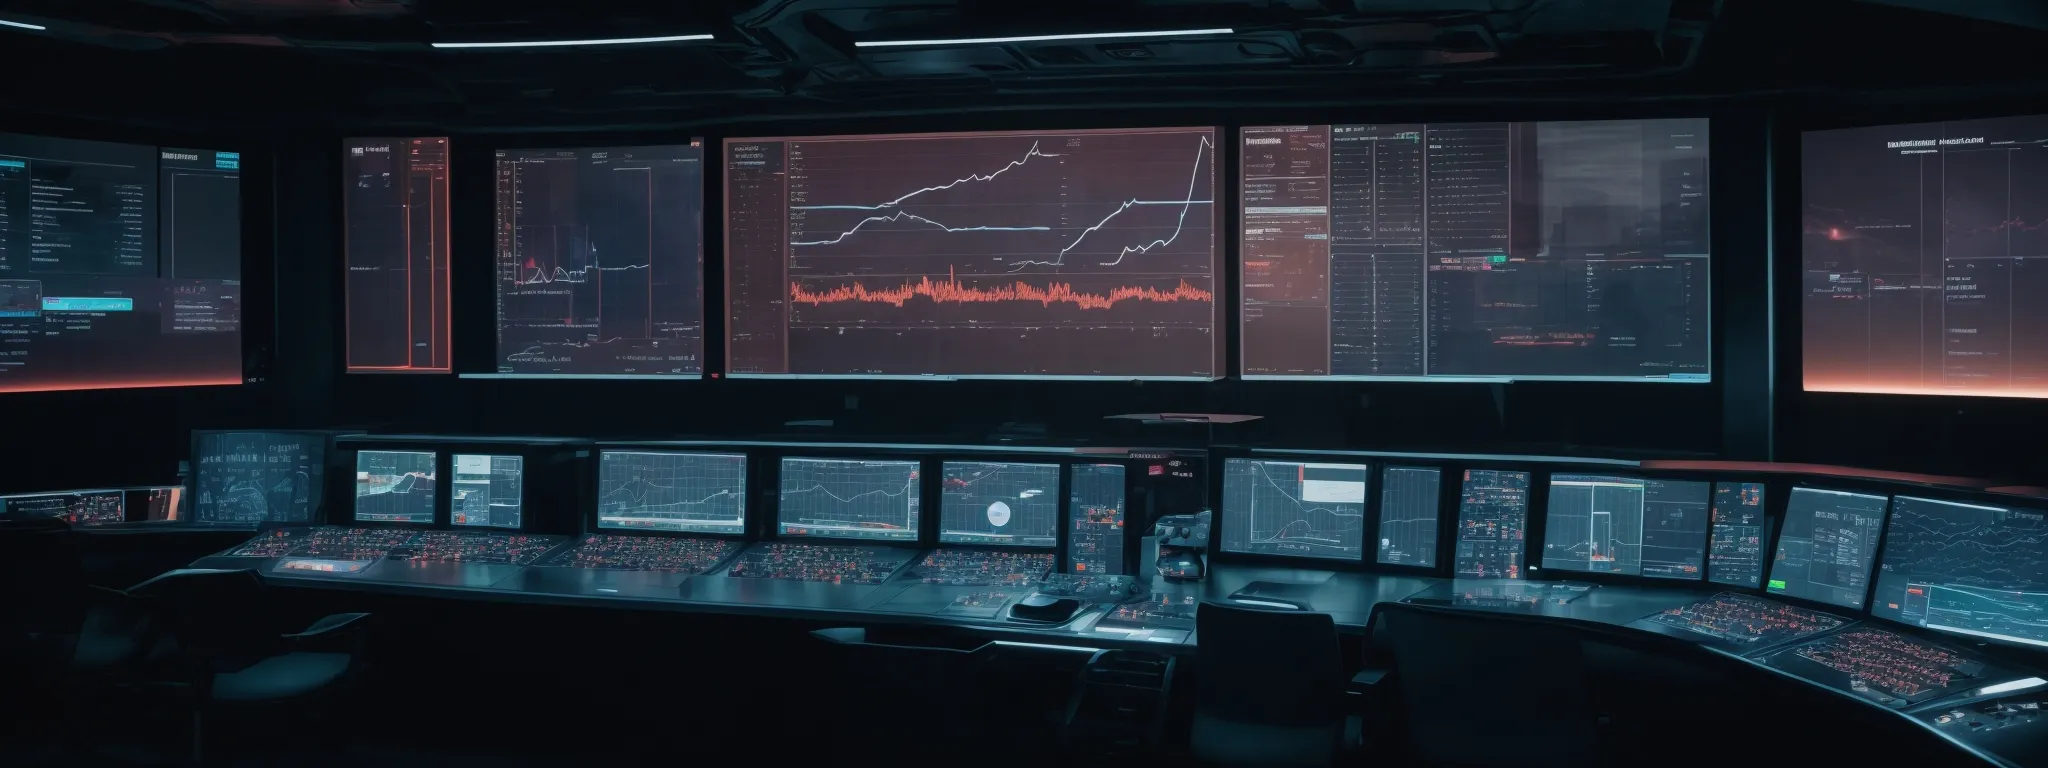 a futuristic control room with screens displaying various data visualizations and graphs.